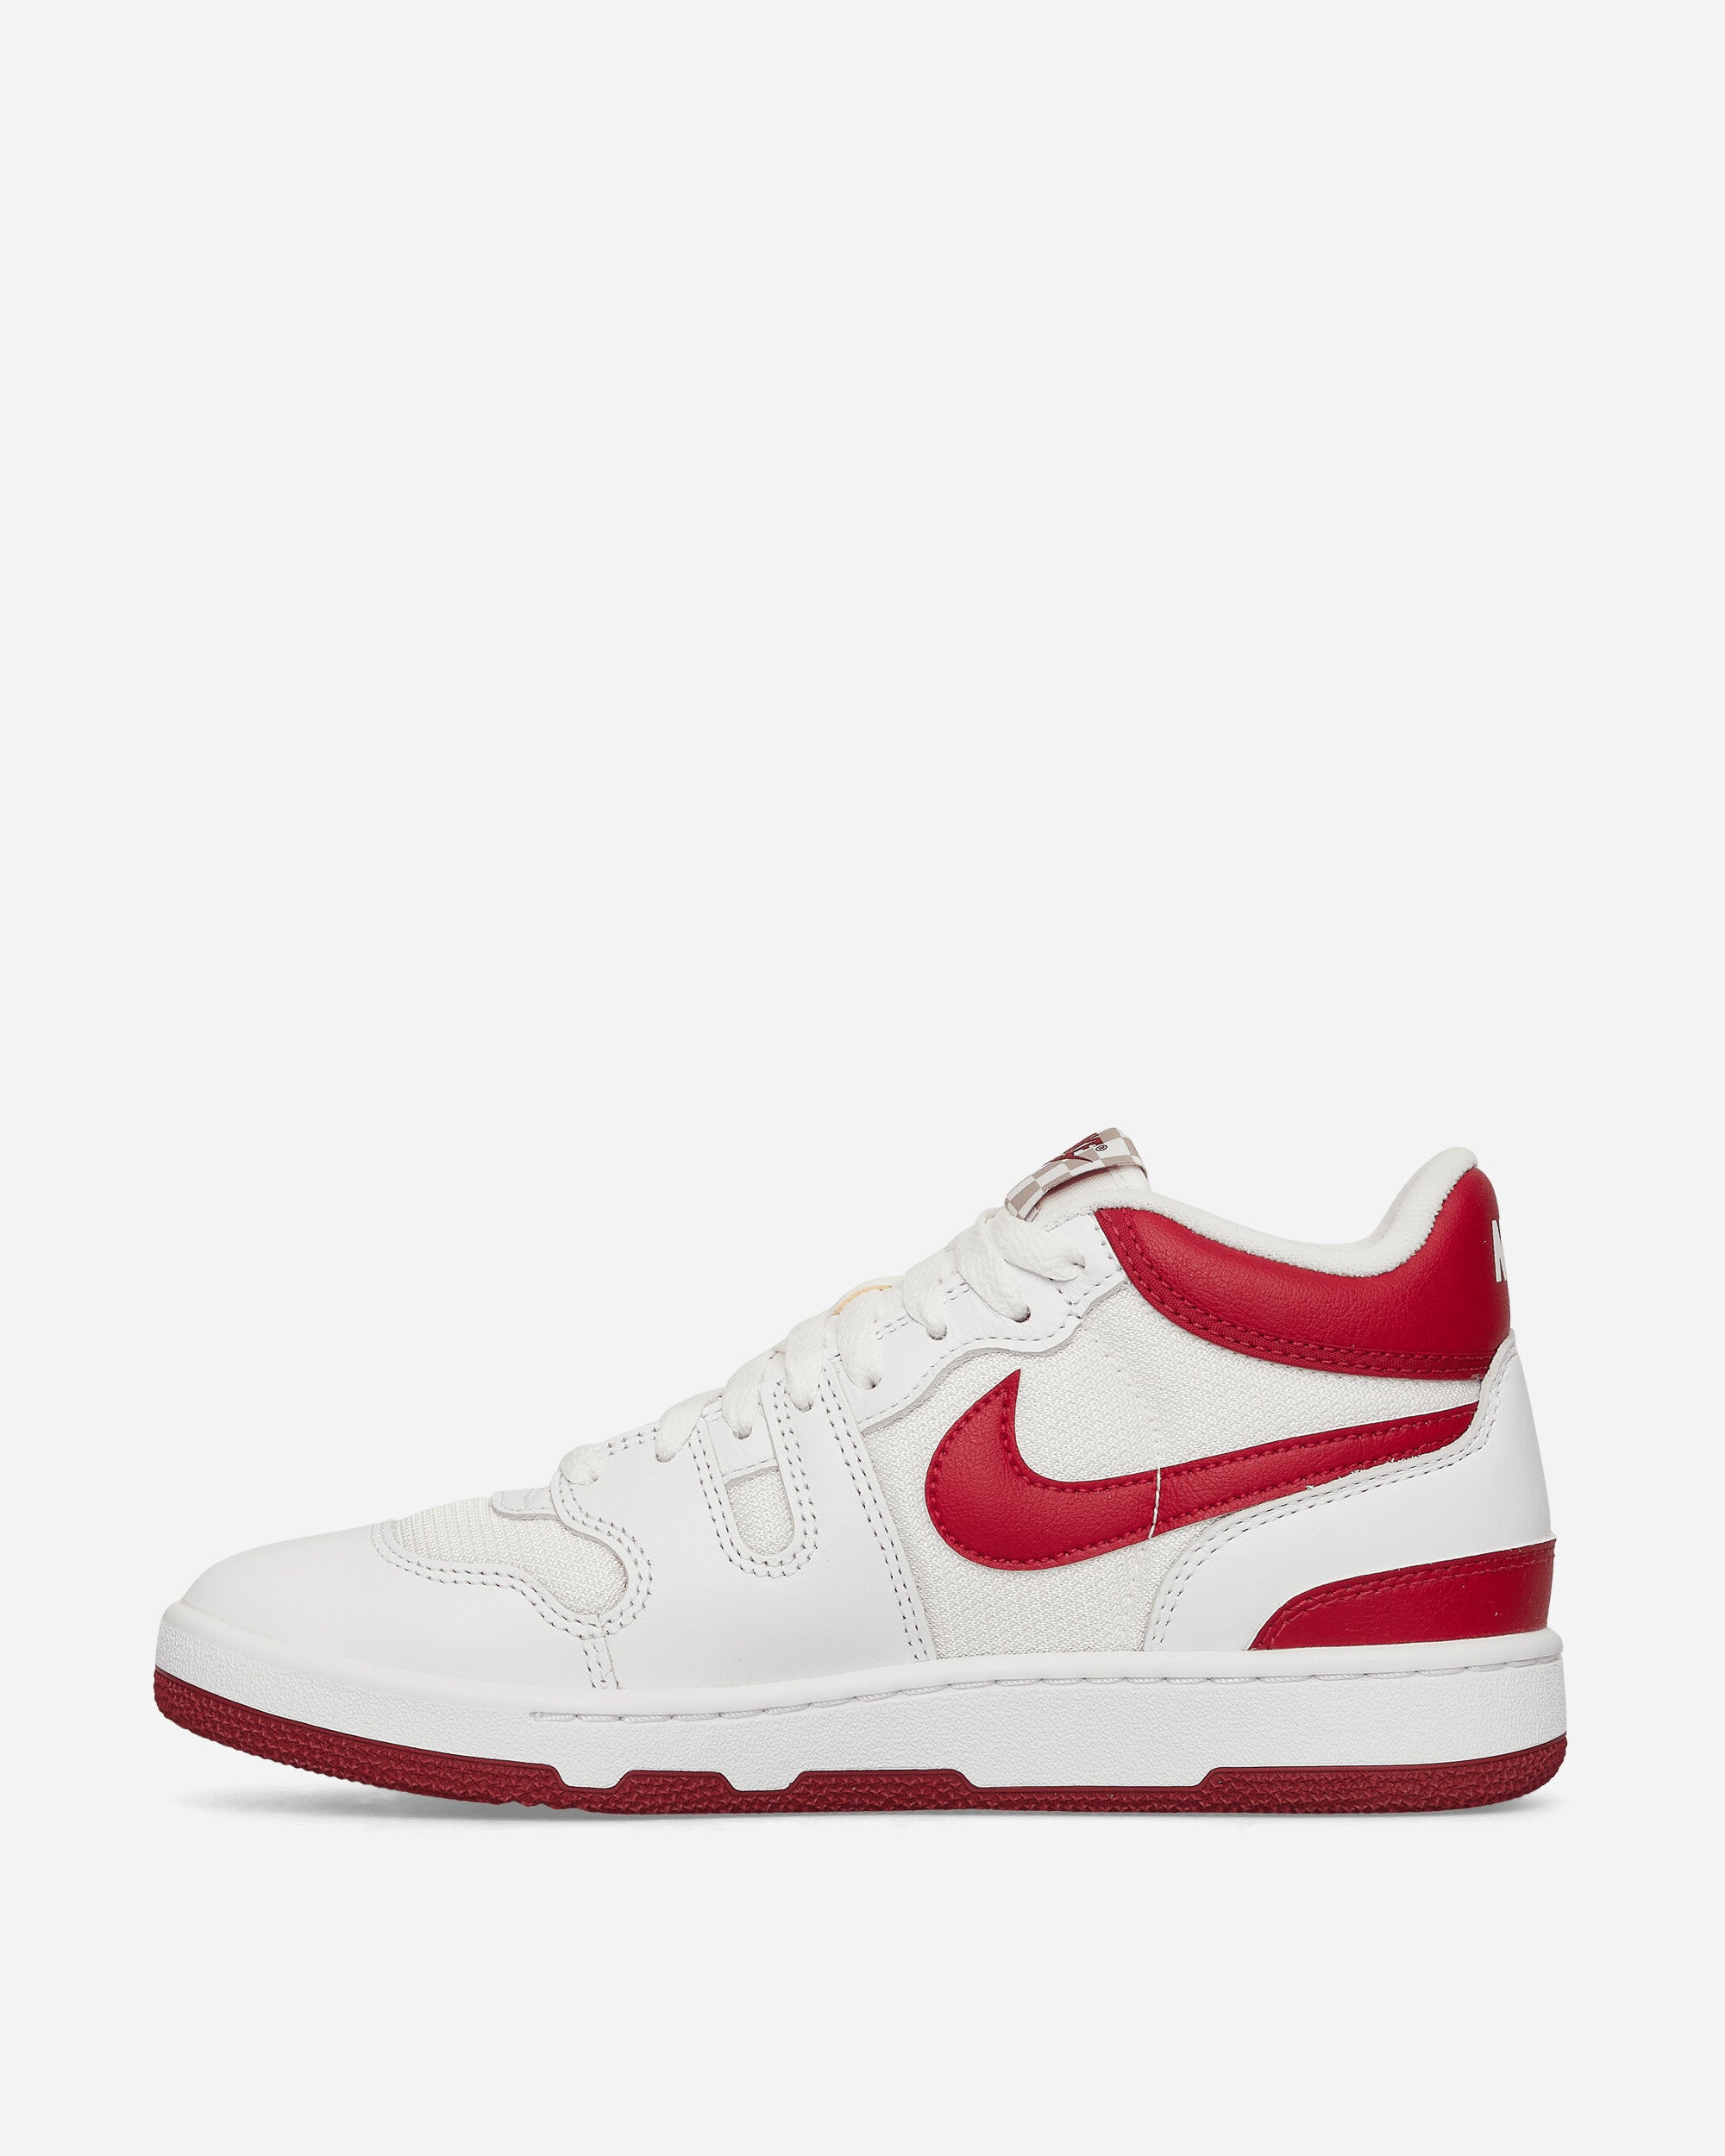 Nike Nike Attack Qs Sp White/Red Crush/White Sneakers High FB8938-100